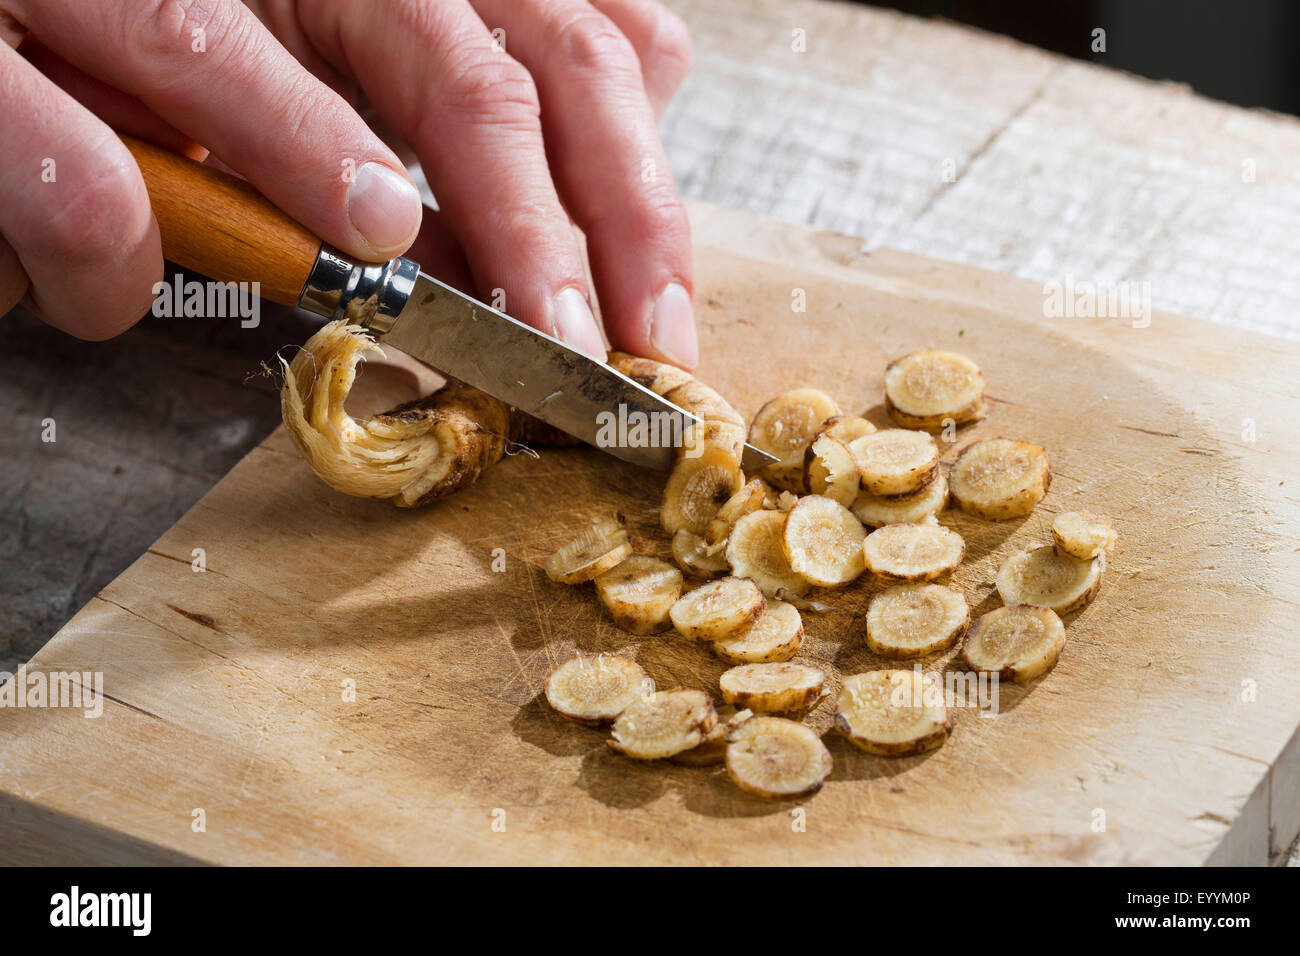 Bouncingbet, Bouncing-bet, Soapwort (Saponaria officinalis), root is sliced , Germany Stock Photo